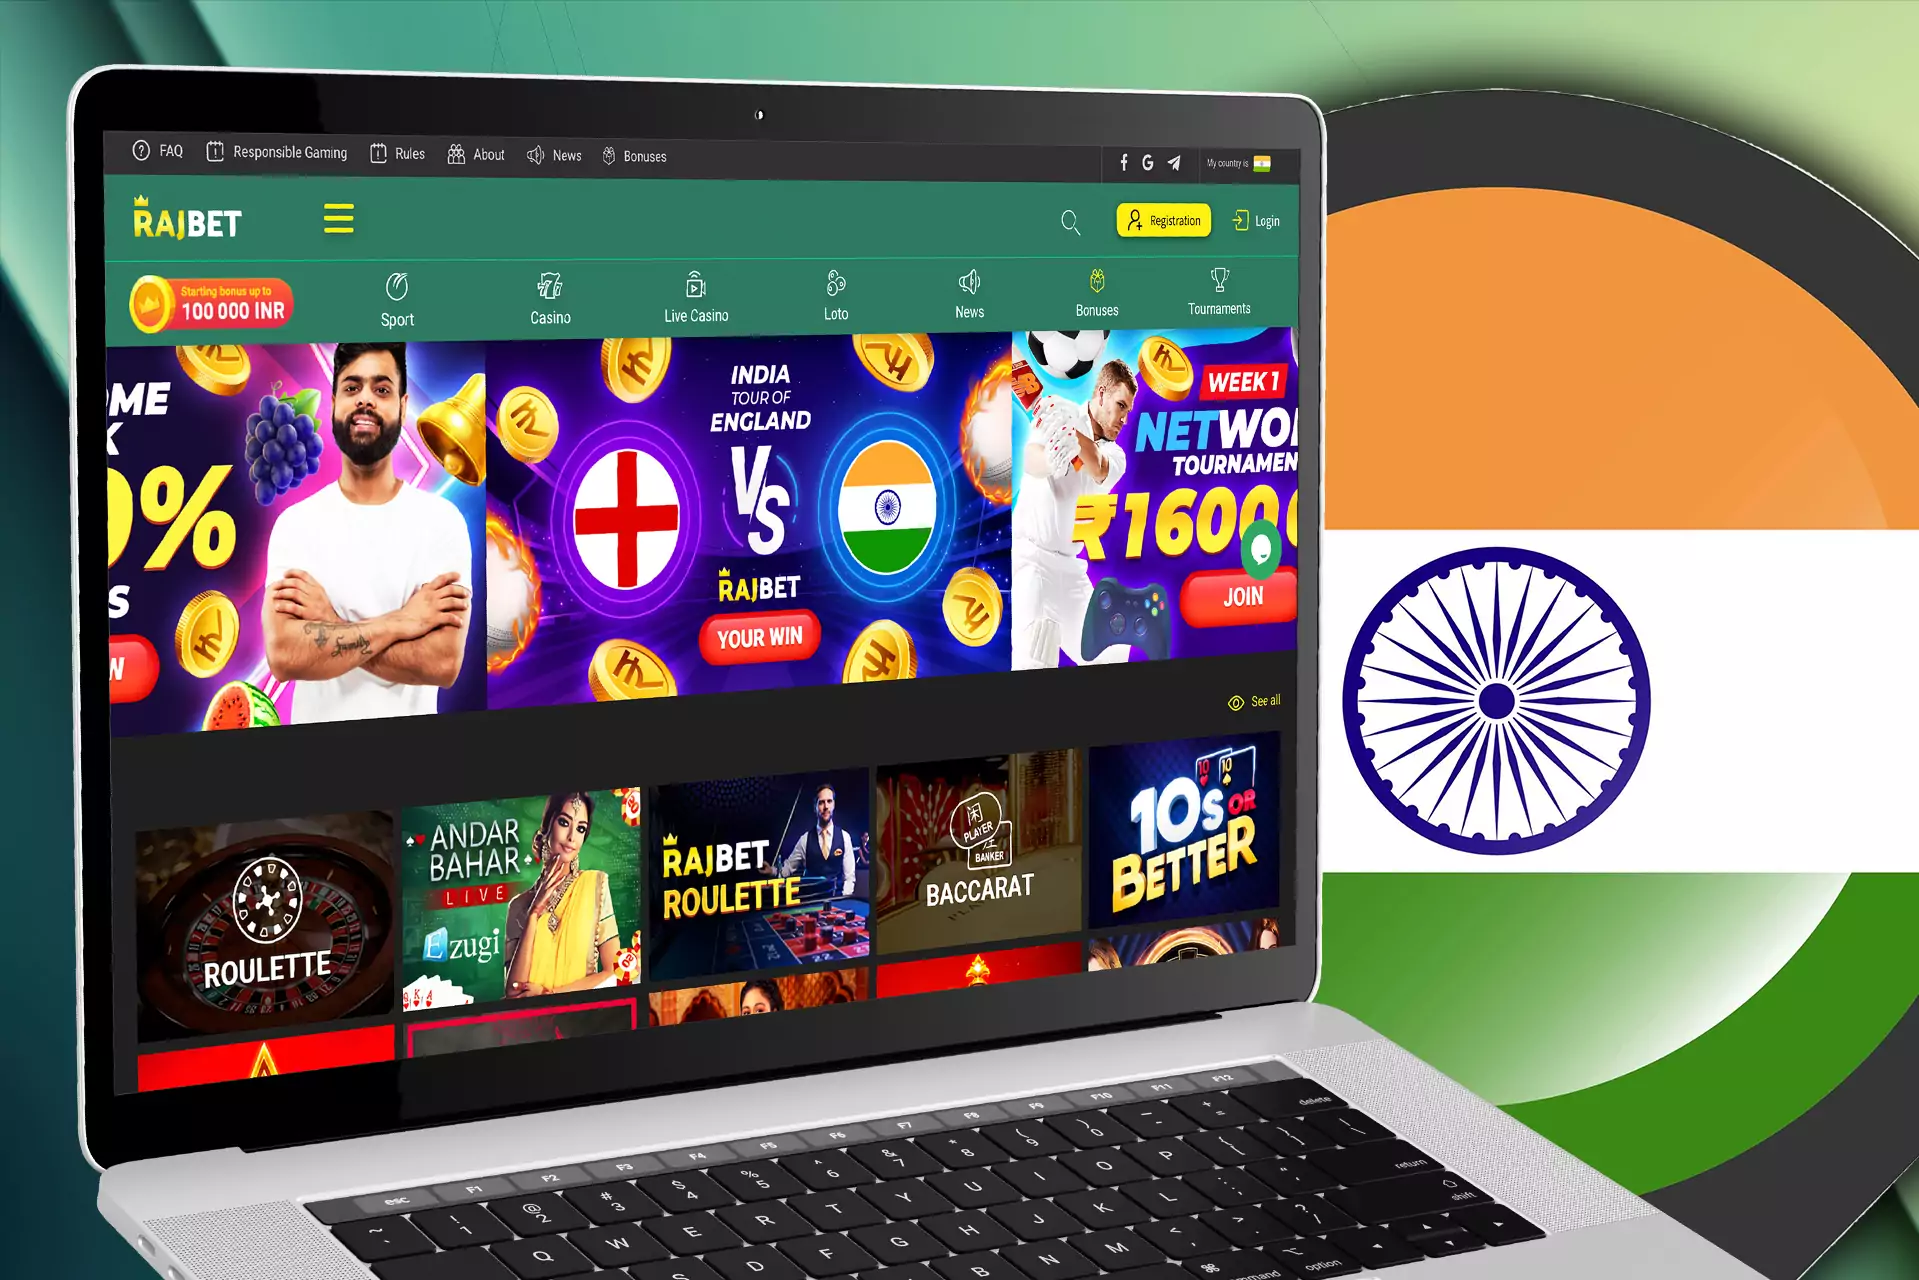 Use the mobile version of the Rajbet website for convenient betting.